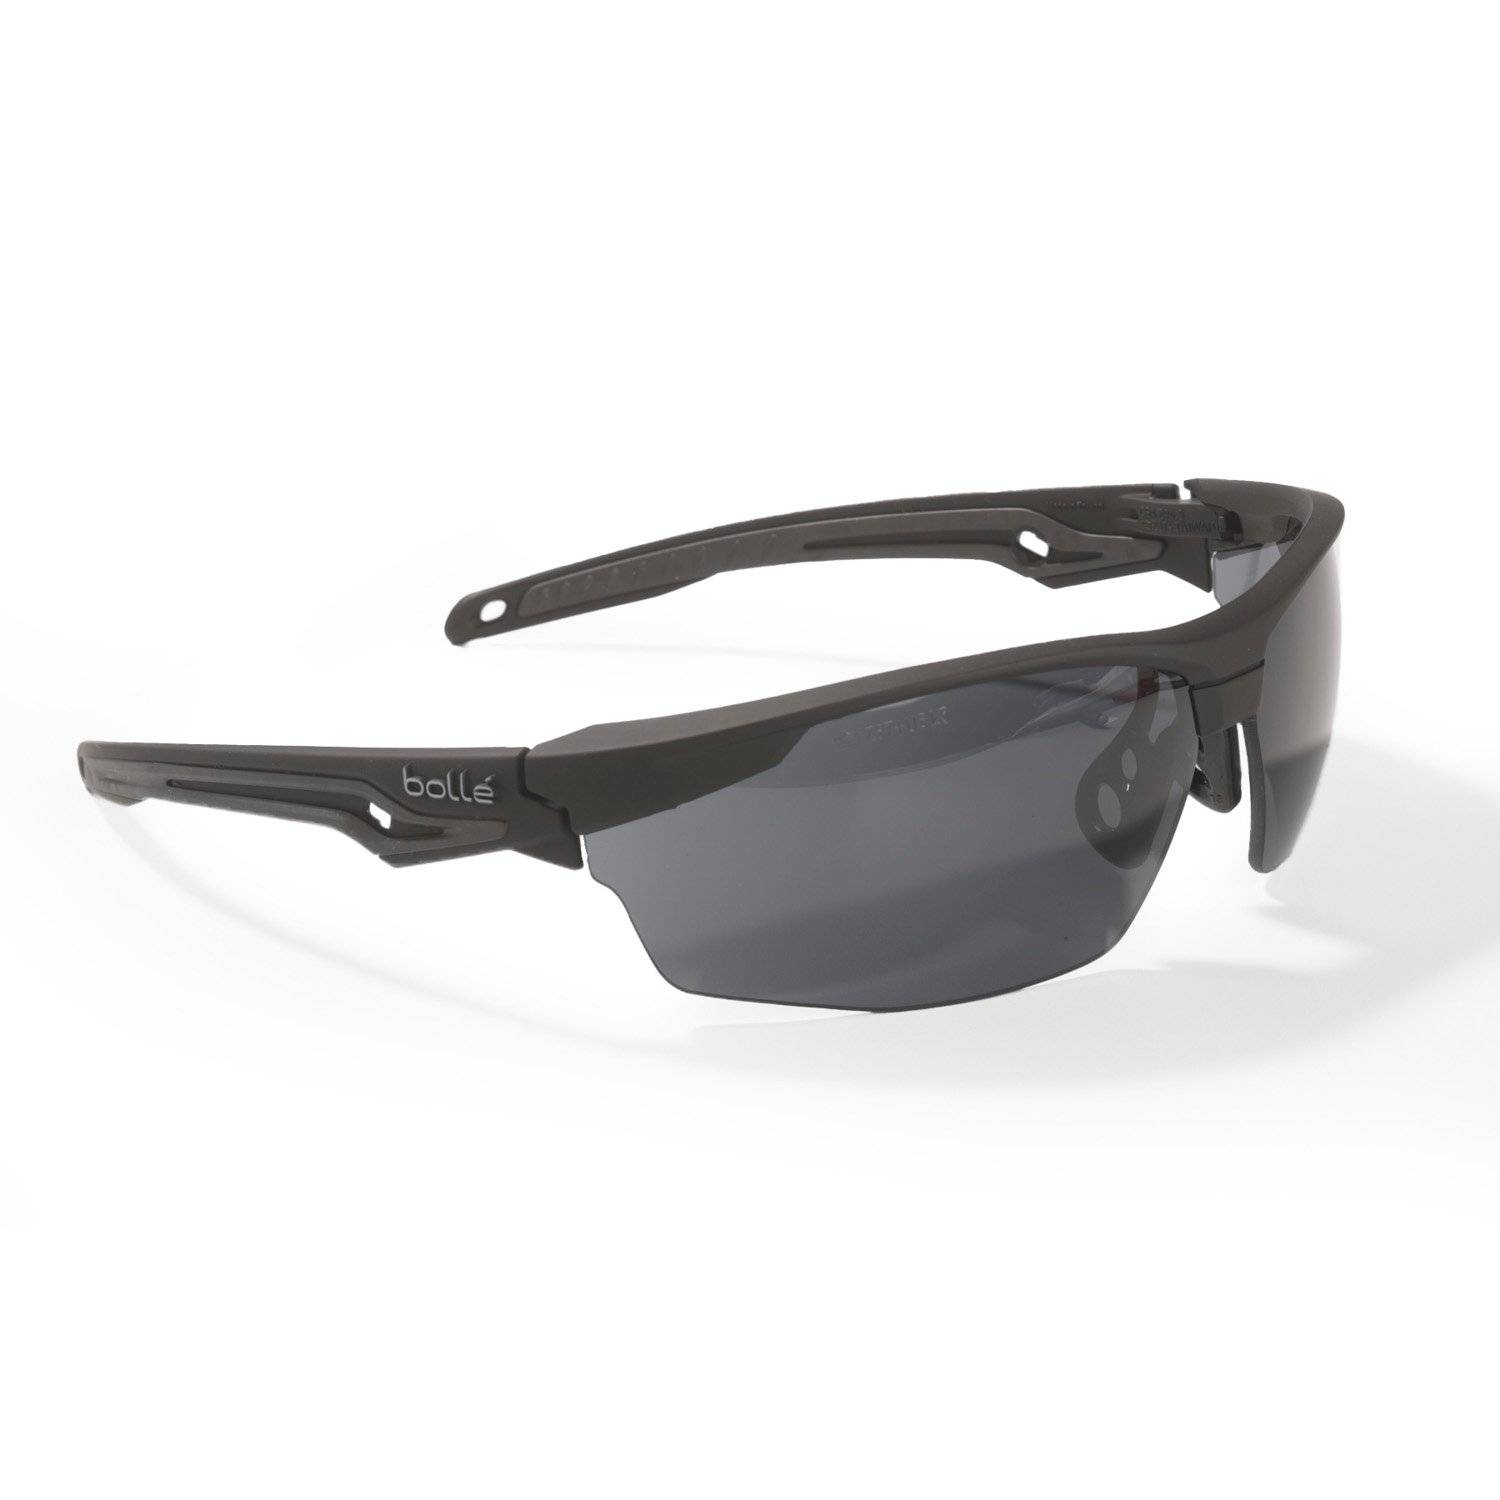 BOLLE SAFETY STANDARD ISSUE TRYON GLASSES